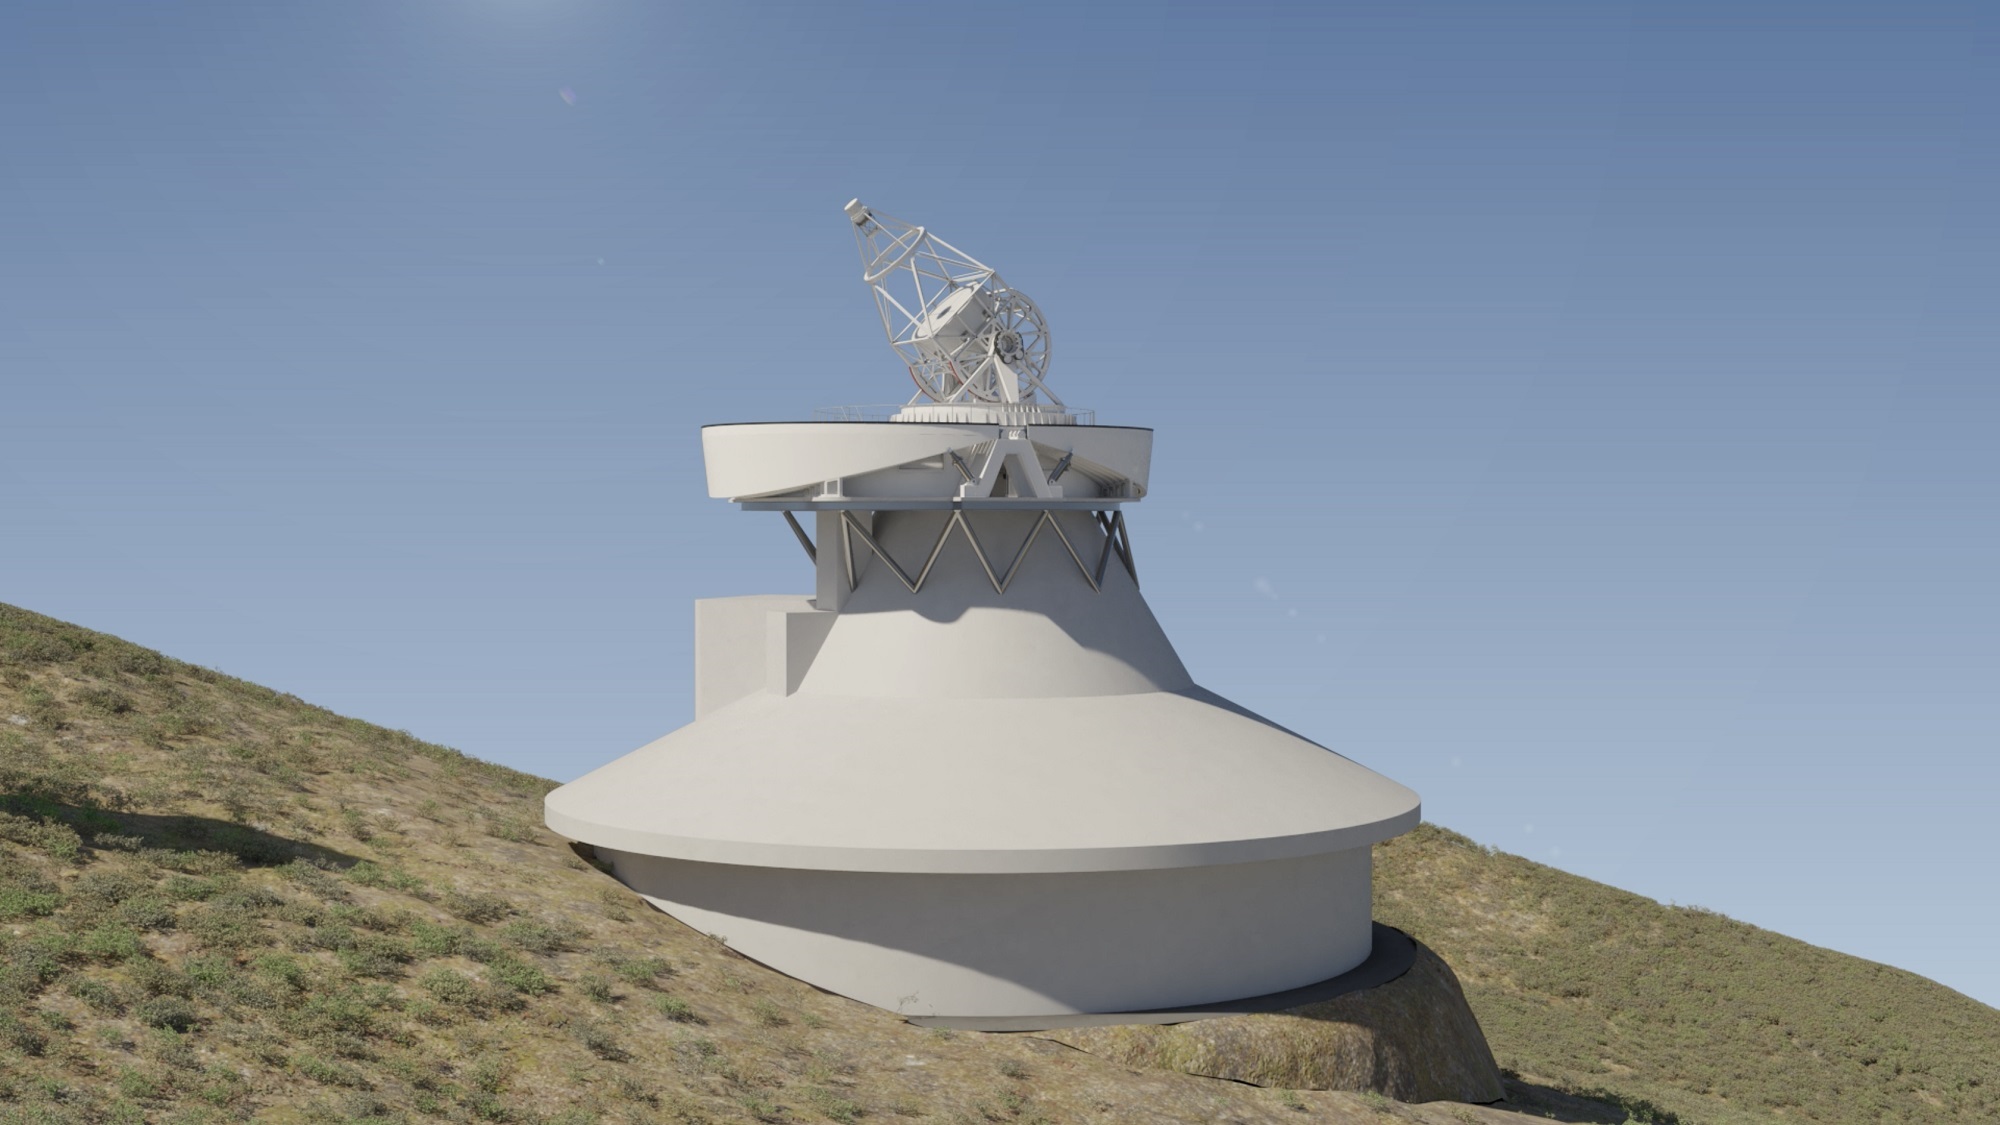 A representation of what the European Solar Telescope will look like when constructed at the observatory in La Palma, Spain. Credit: IDOM